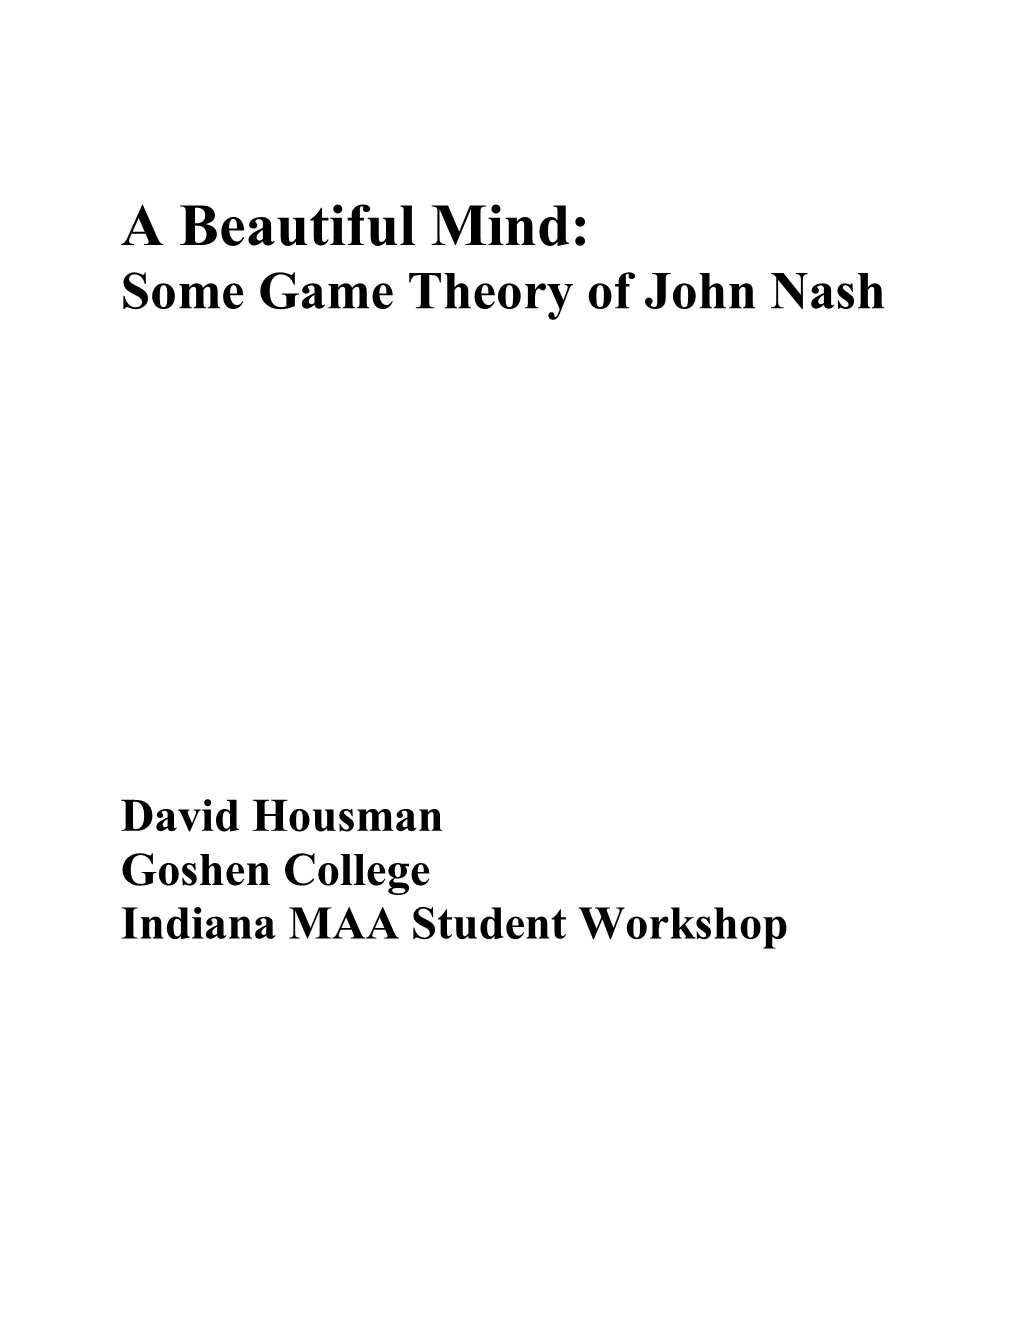 A Beautiful Mind: Some Game Theory of John Nash